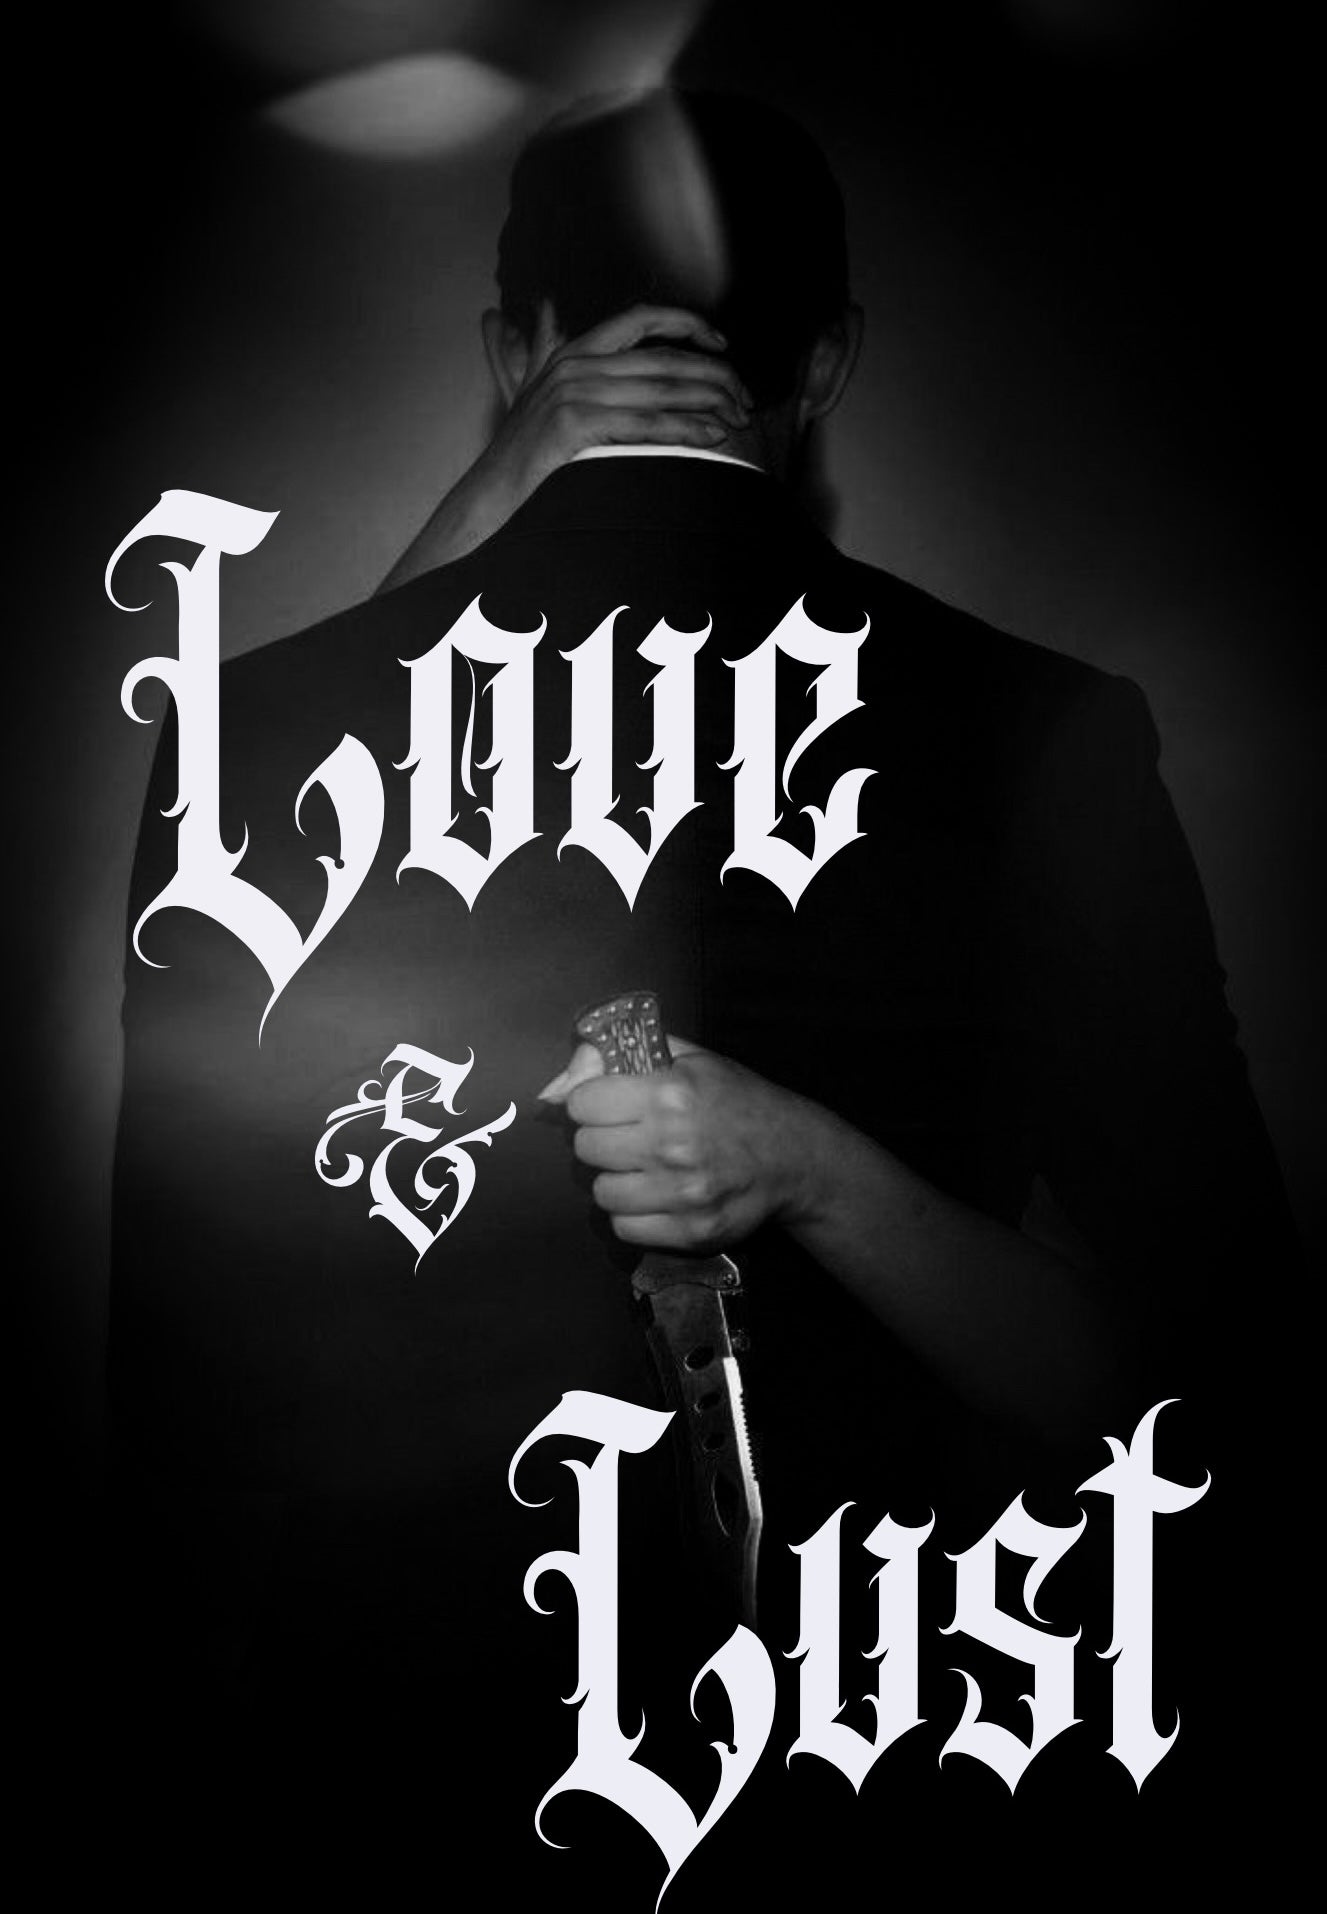 LOVE & LUST {GAME/ADVICE.. Knowledge to Learn the Deeper Rules of Attraction Laws of Love.}